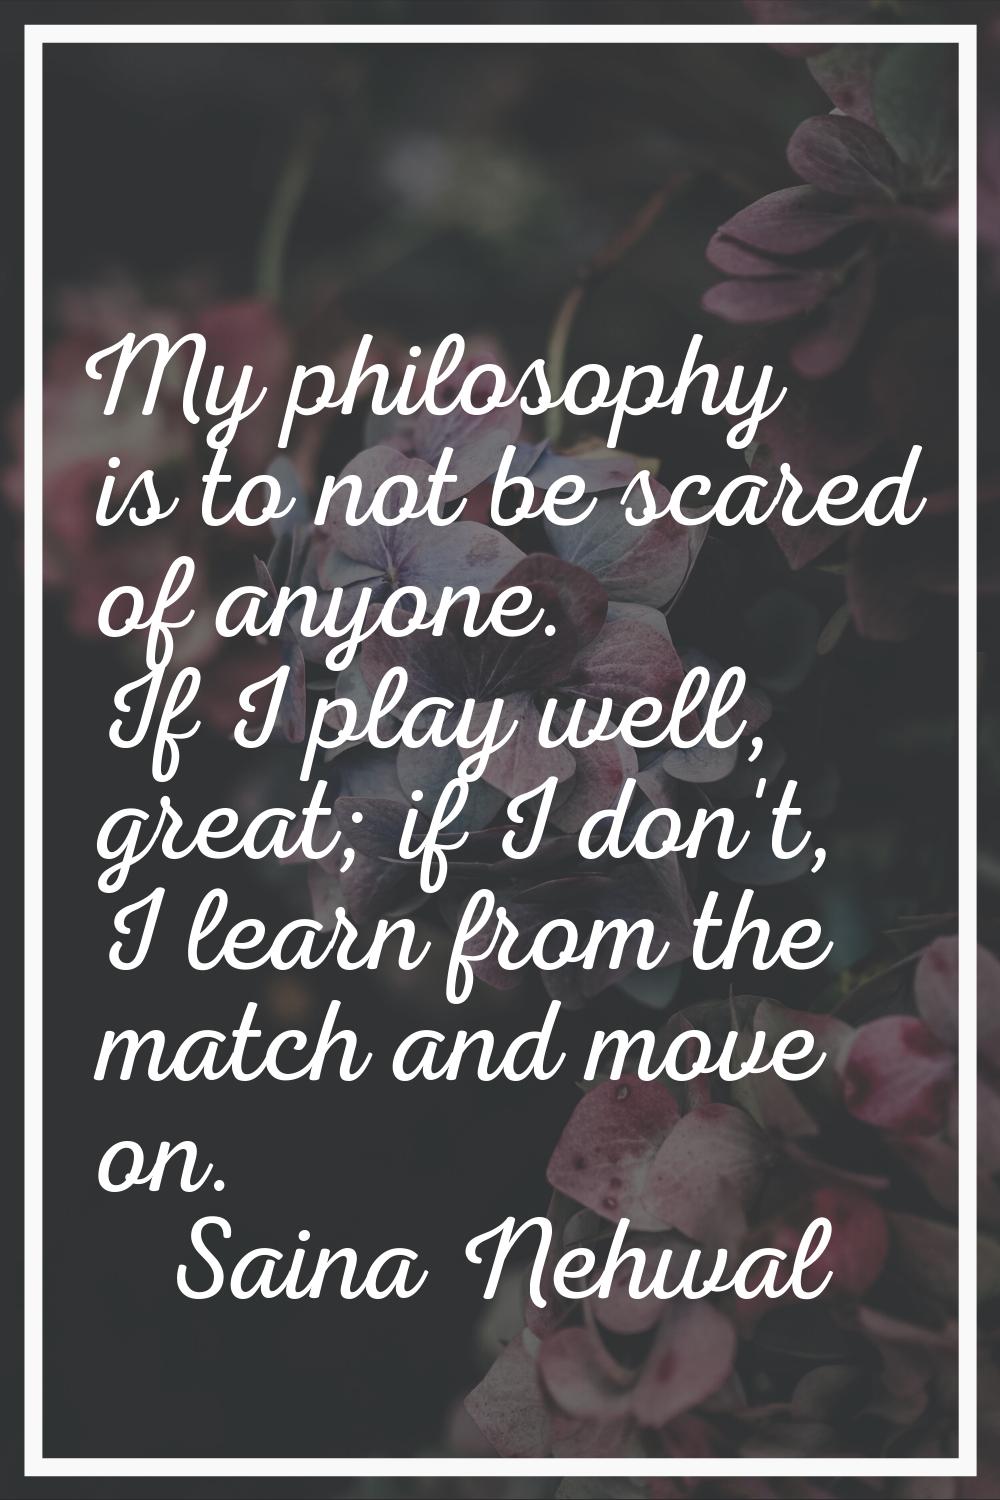 My philosophy is to not be scared of anyone. If I play well, great; if I don't, I learn from the ma